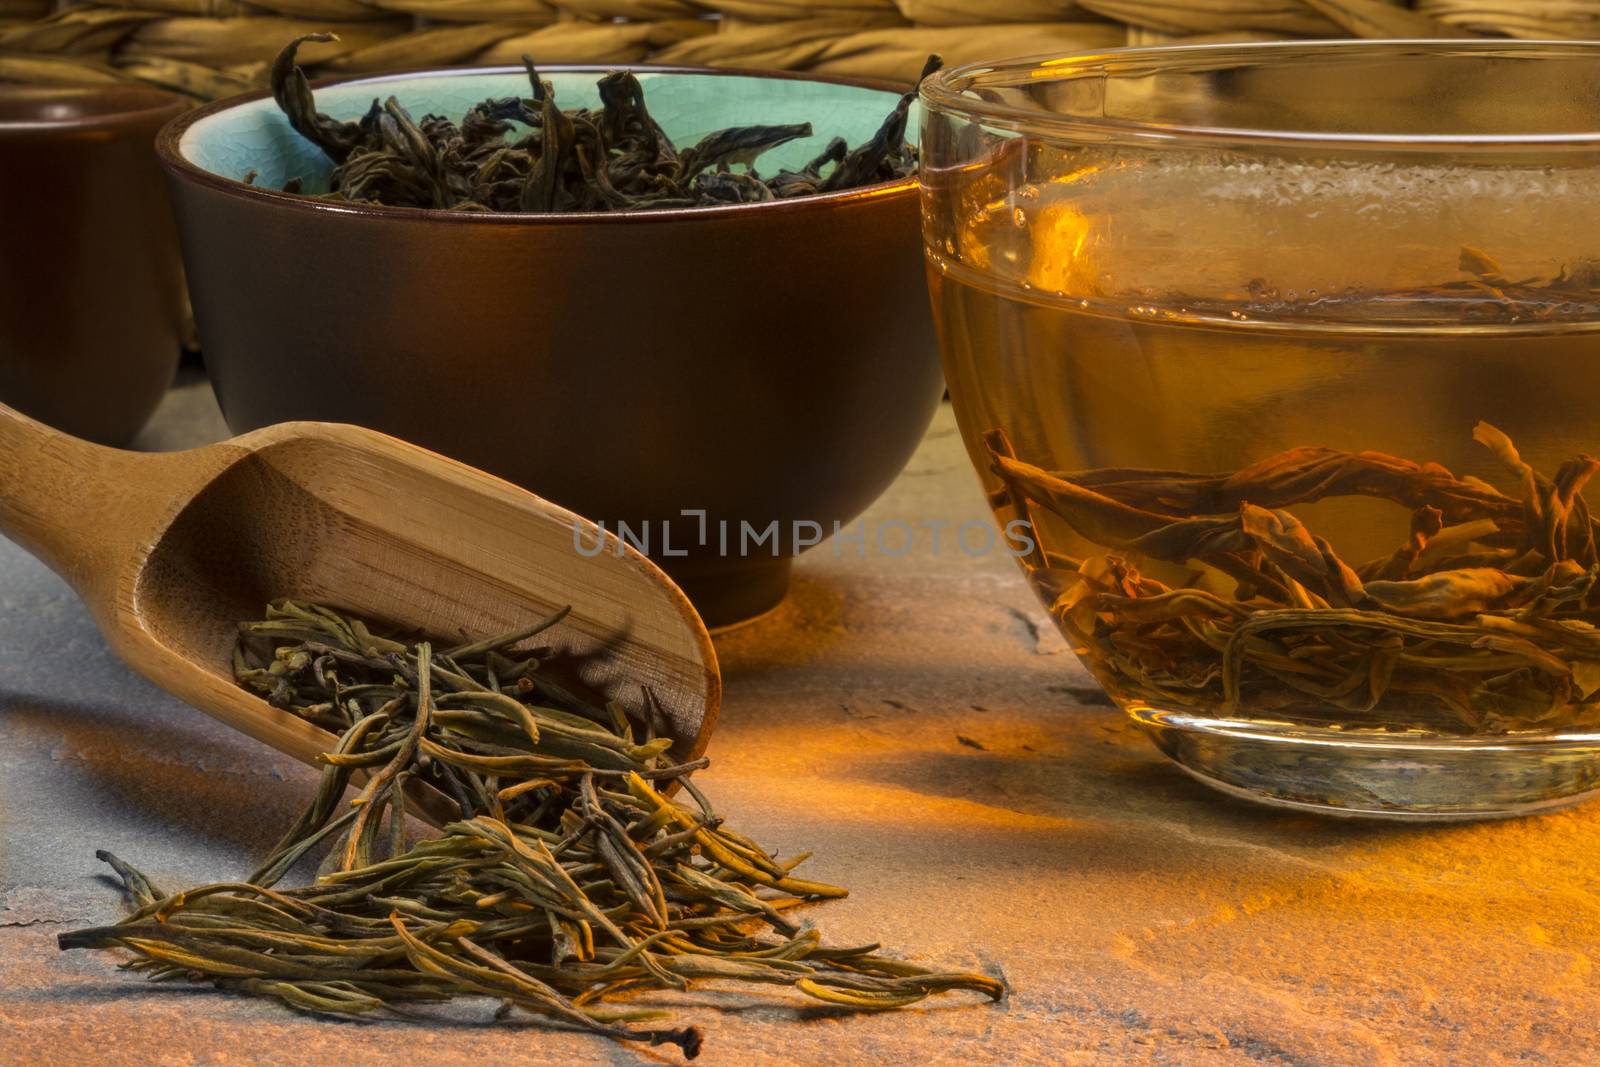 Chinese Green Tea is tea that is made from un-fermented leaves and is pale in color and slightly bitter in flavor, produced mainly in China and Japan. Green tea is made solely with the leaves of Camellia sinensis that have undergone minimal oxidation during processing.